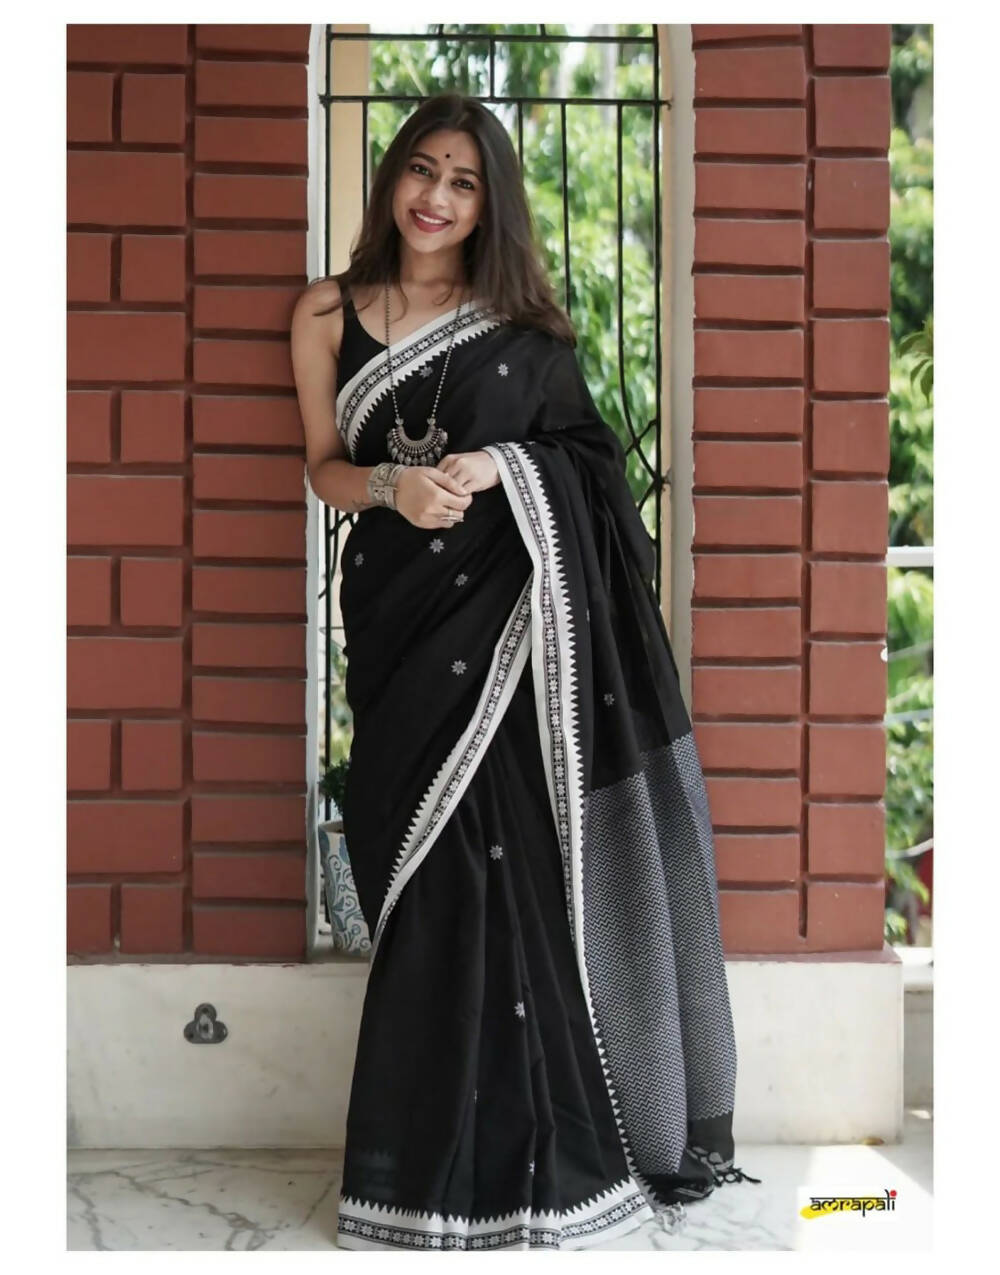 PONGAL SPECIAL. HANDWOVEN PURE MERCERISED COTTON WITH MANIPURI PATTERN THREADWORK - BLACK AND WHITE